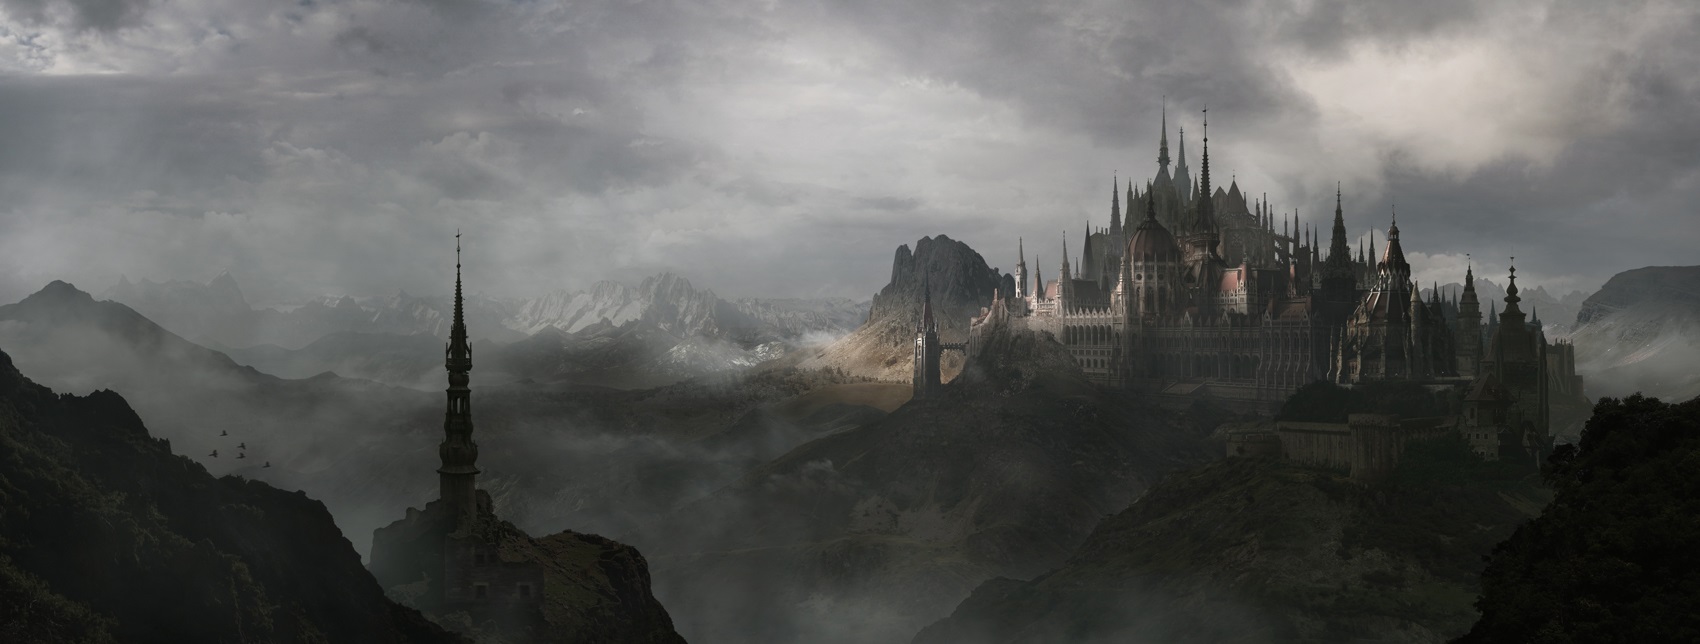 Matte Painting Wallpapers - Wallpaper Cave